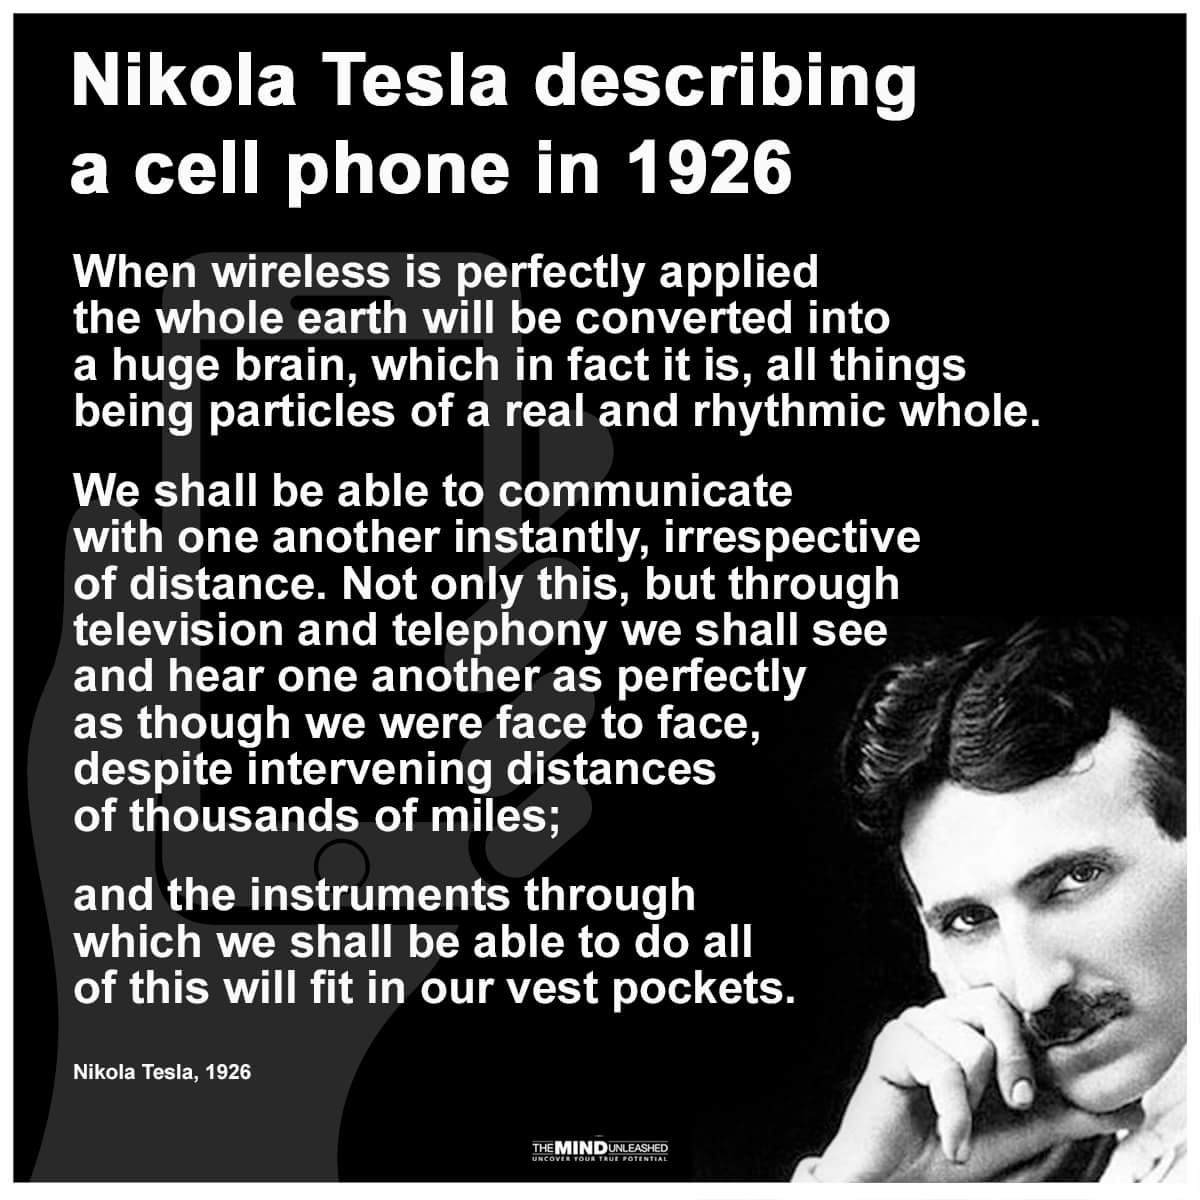 nikola tesla on cell phones - Nikola Tesla describing a cell phone in 1926 When wireless is perfectly applied the whole earth will be converted into a huge brain, which in fact it is, all things being particles of a real and rhythmic whole. We shall be ab